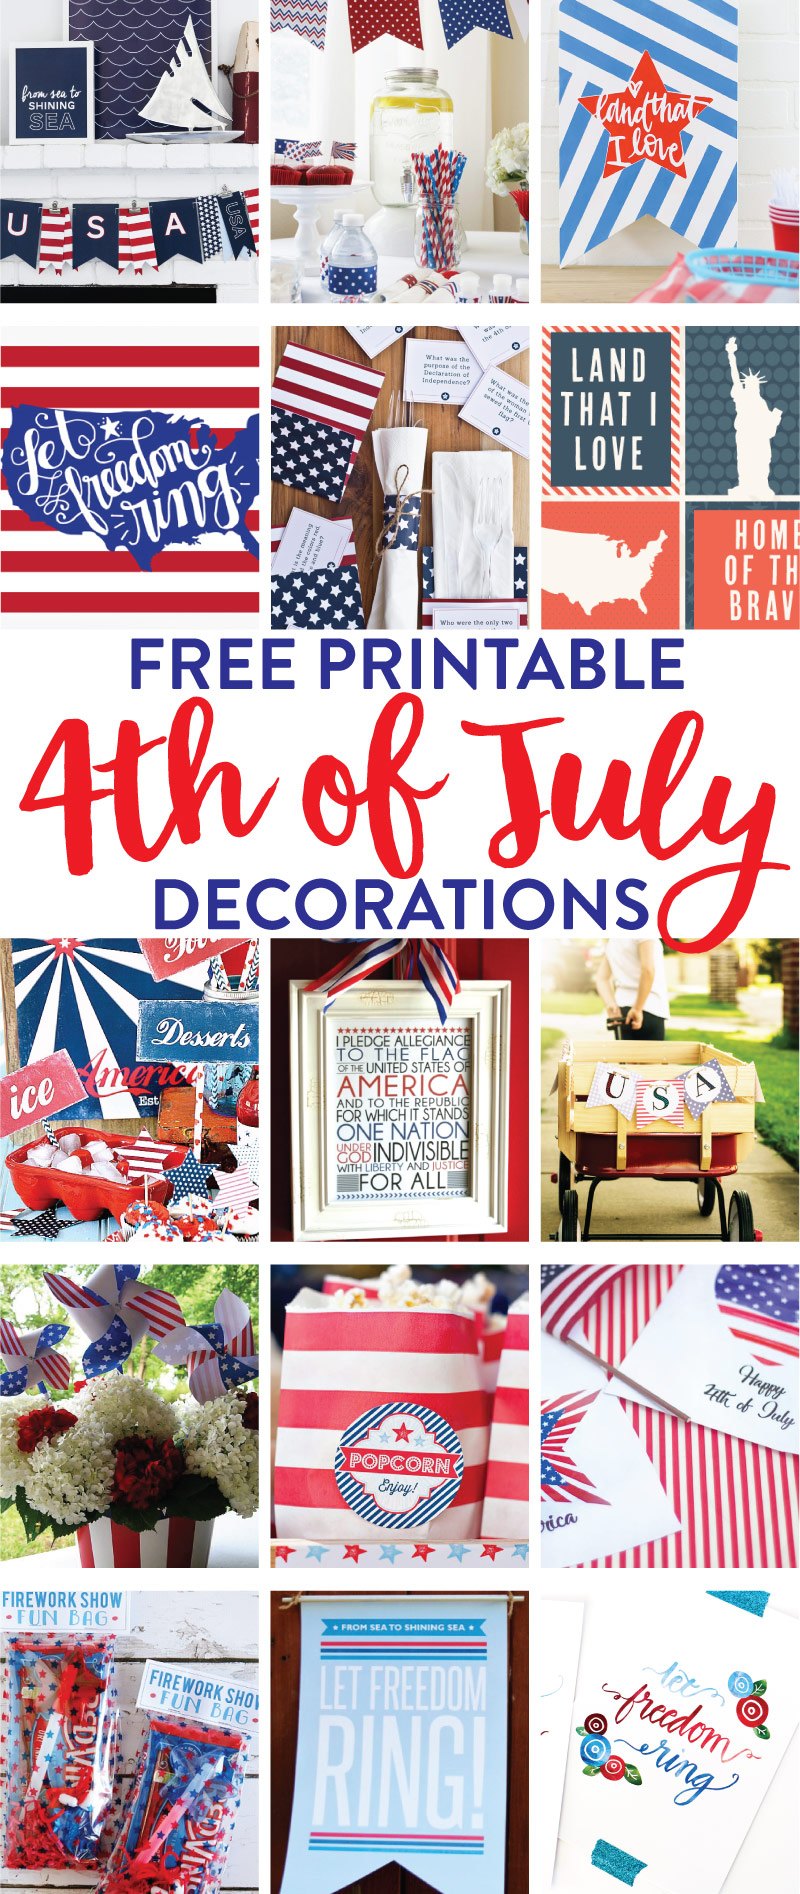 15 FREE Printable 4th of July Decorations on Love the Day